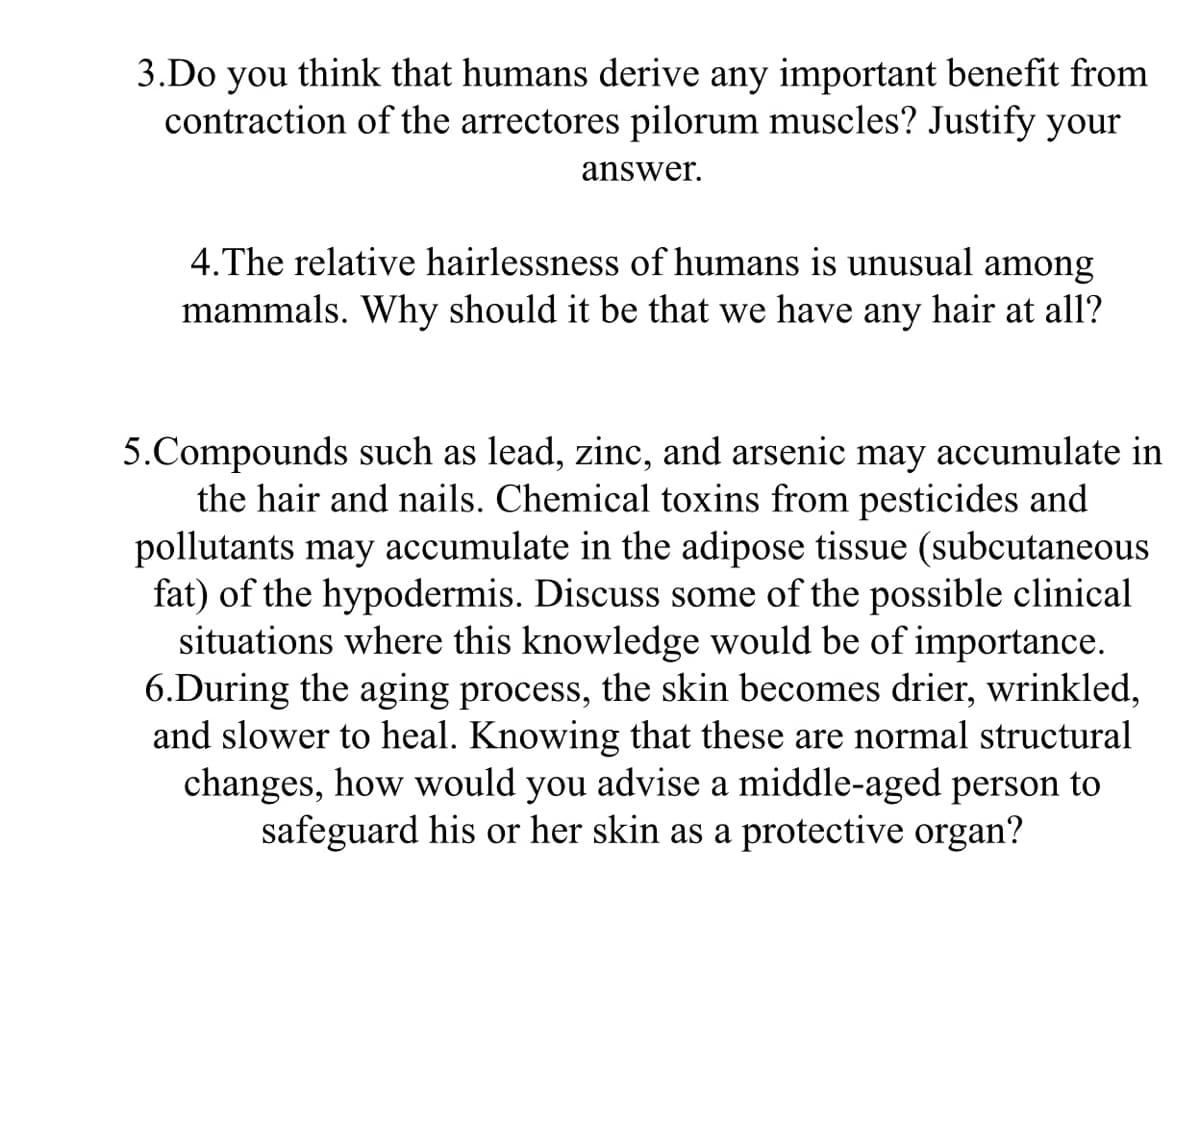 3.Do you think that humans derive any important benefit from
contraction of the arrectores pilorum muscles? Justify your
answer.
4. The relative hairlessness of humans is unusual among
mammals. Why should it be that we have any hair at all?
5.Compounds such as lead, zinc, and arsenic may accumulate in
the hair and nails. Chemical toxins from pesticides and
pollutants may accumulate in the adipose tissue (subcutaneous
fat) of the hypodermis. Discuss some of the possible clinical
situations where this knowledge would be of importance.
6.During the aging process, the skin becomes drier, wrinkled,
and slower to heal. Knowing that these are normal structural
changes, how would you advise a middle-aged person to
safeguard his or her skin as a protective organ?